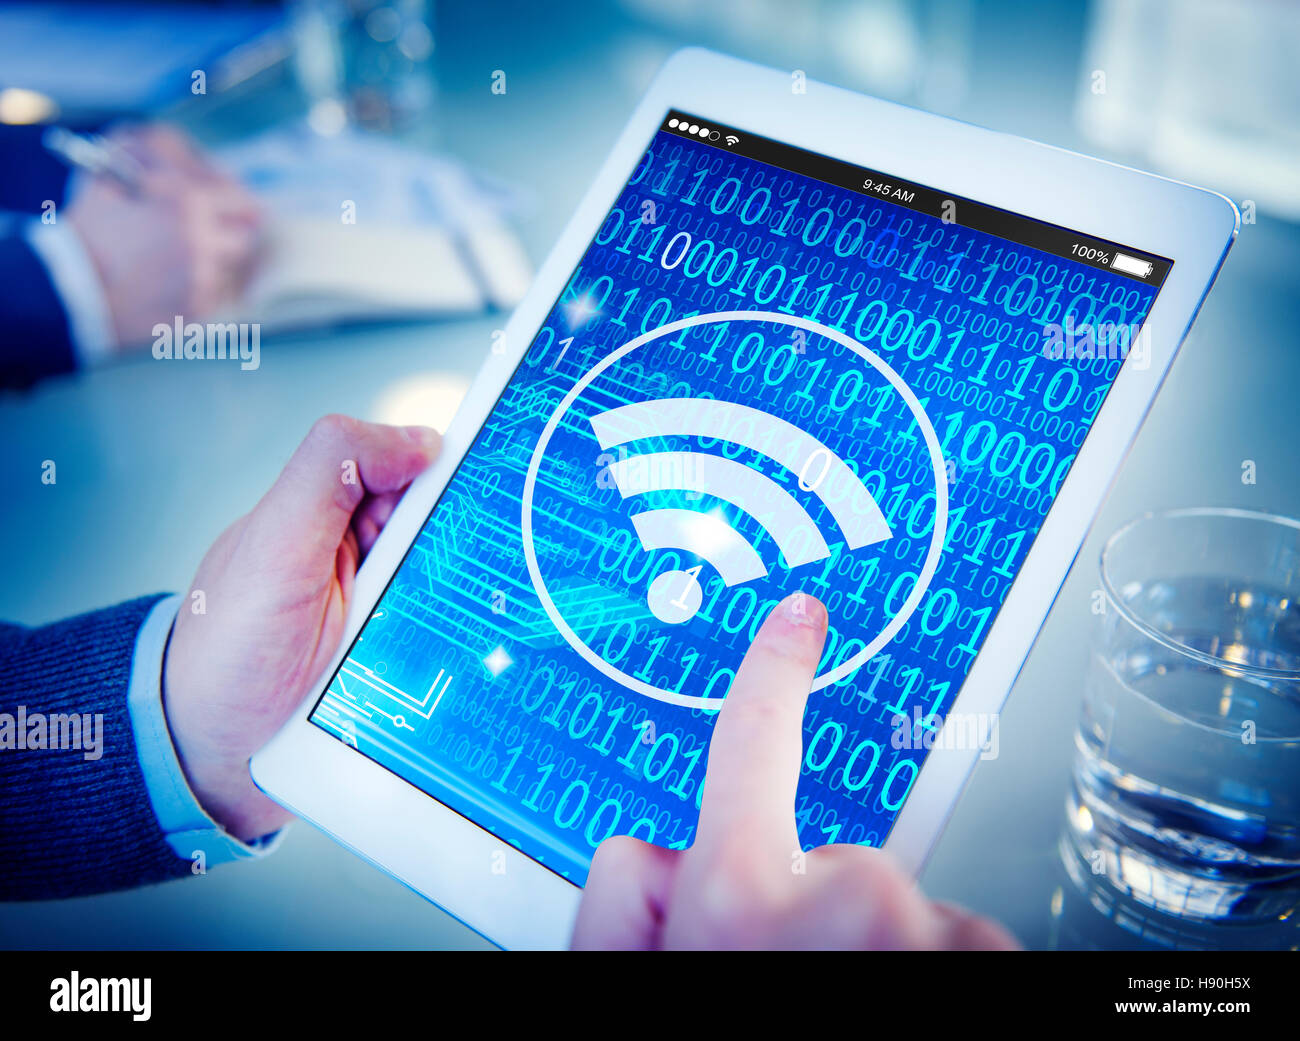 Wifi Wireless Signal Network Connection Technology Concept Stock Photo